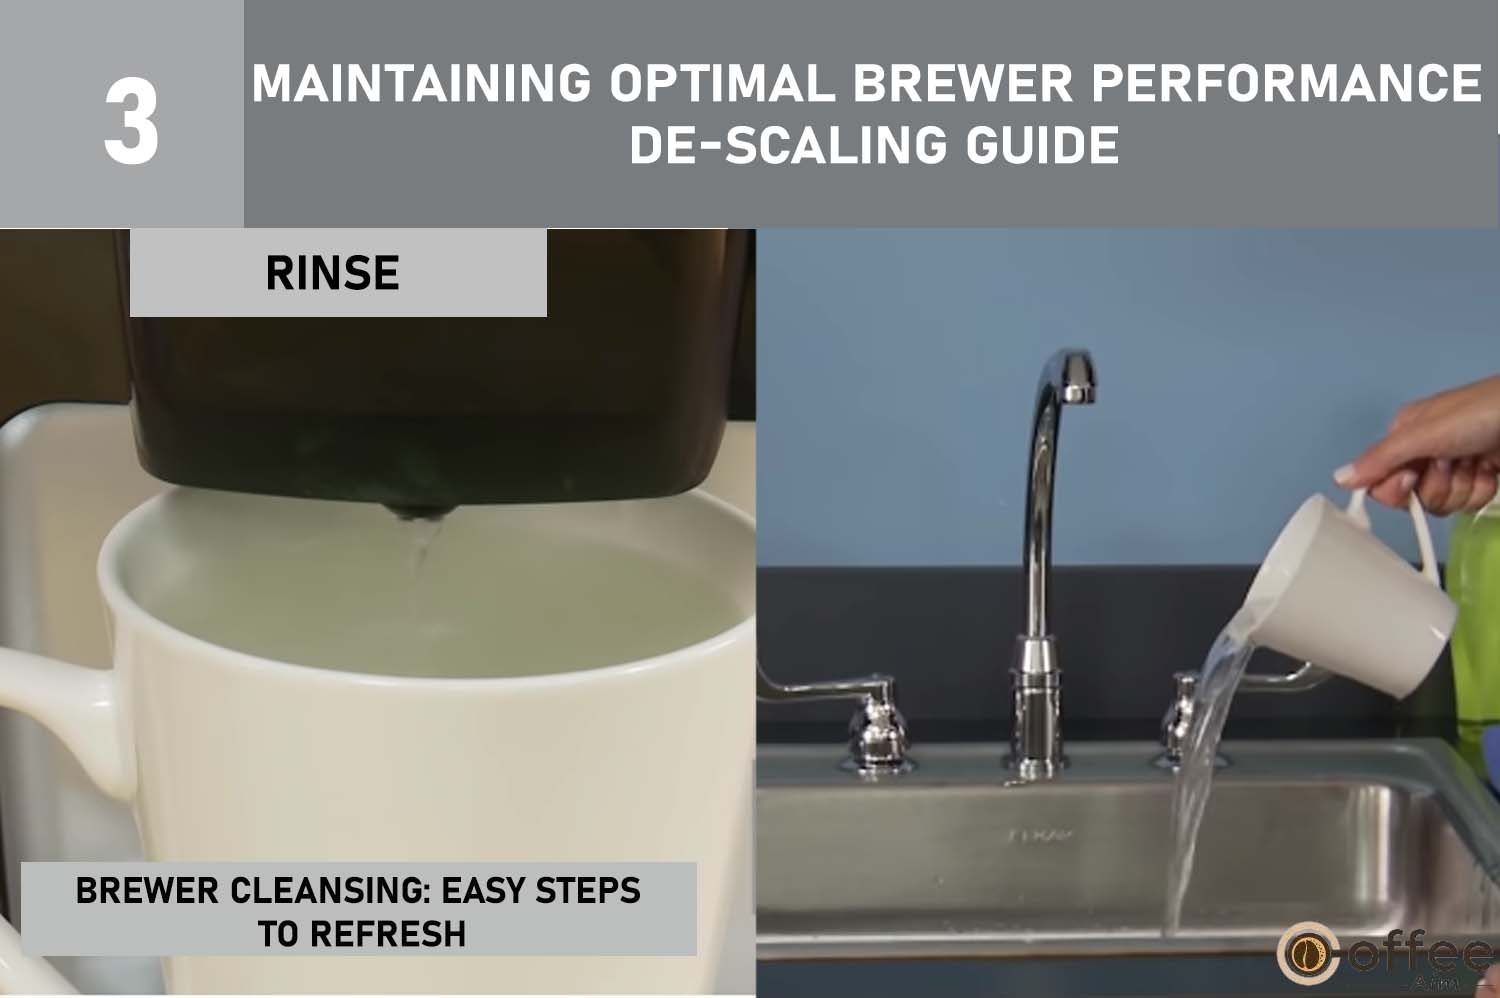 The provided image illustrates the "RINSE" step as part of the "Maintaining Optimal Brewer Performance: De-scaling Guide" featured in the article "How To Use Keurig B-31."